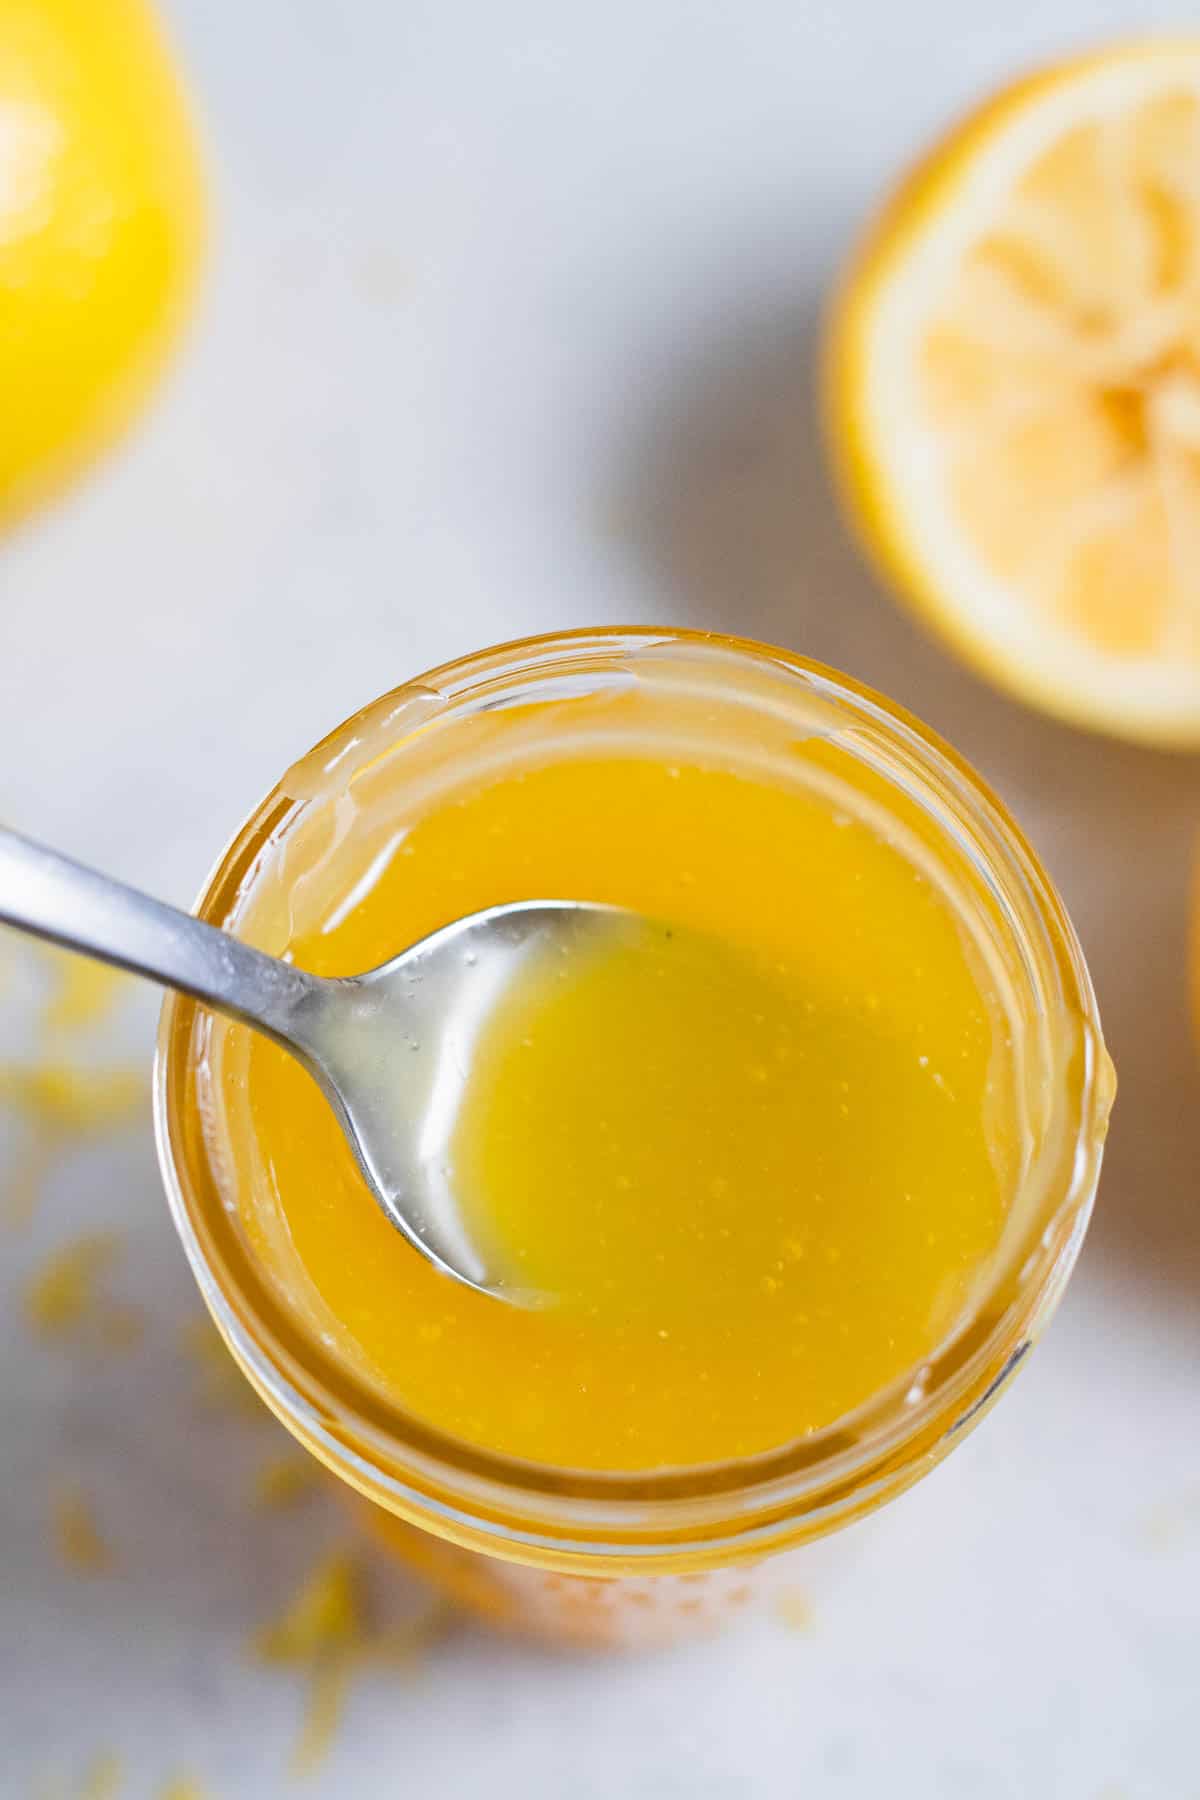 Lemon curd in a glass jar on a gray surface.